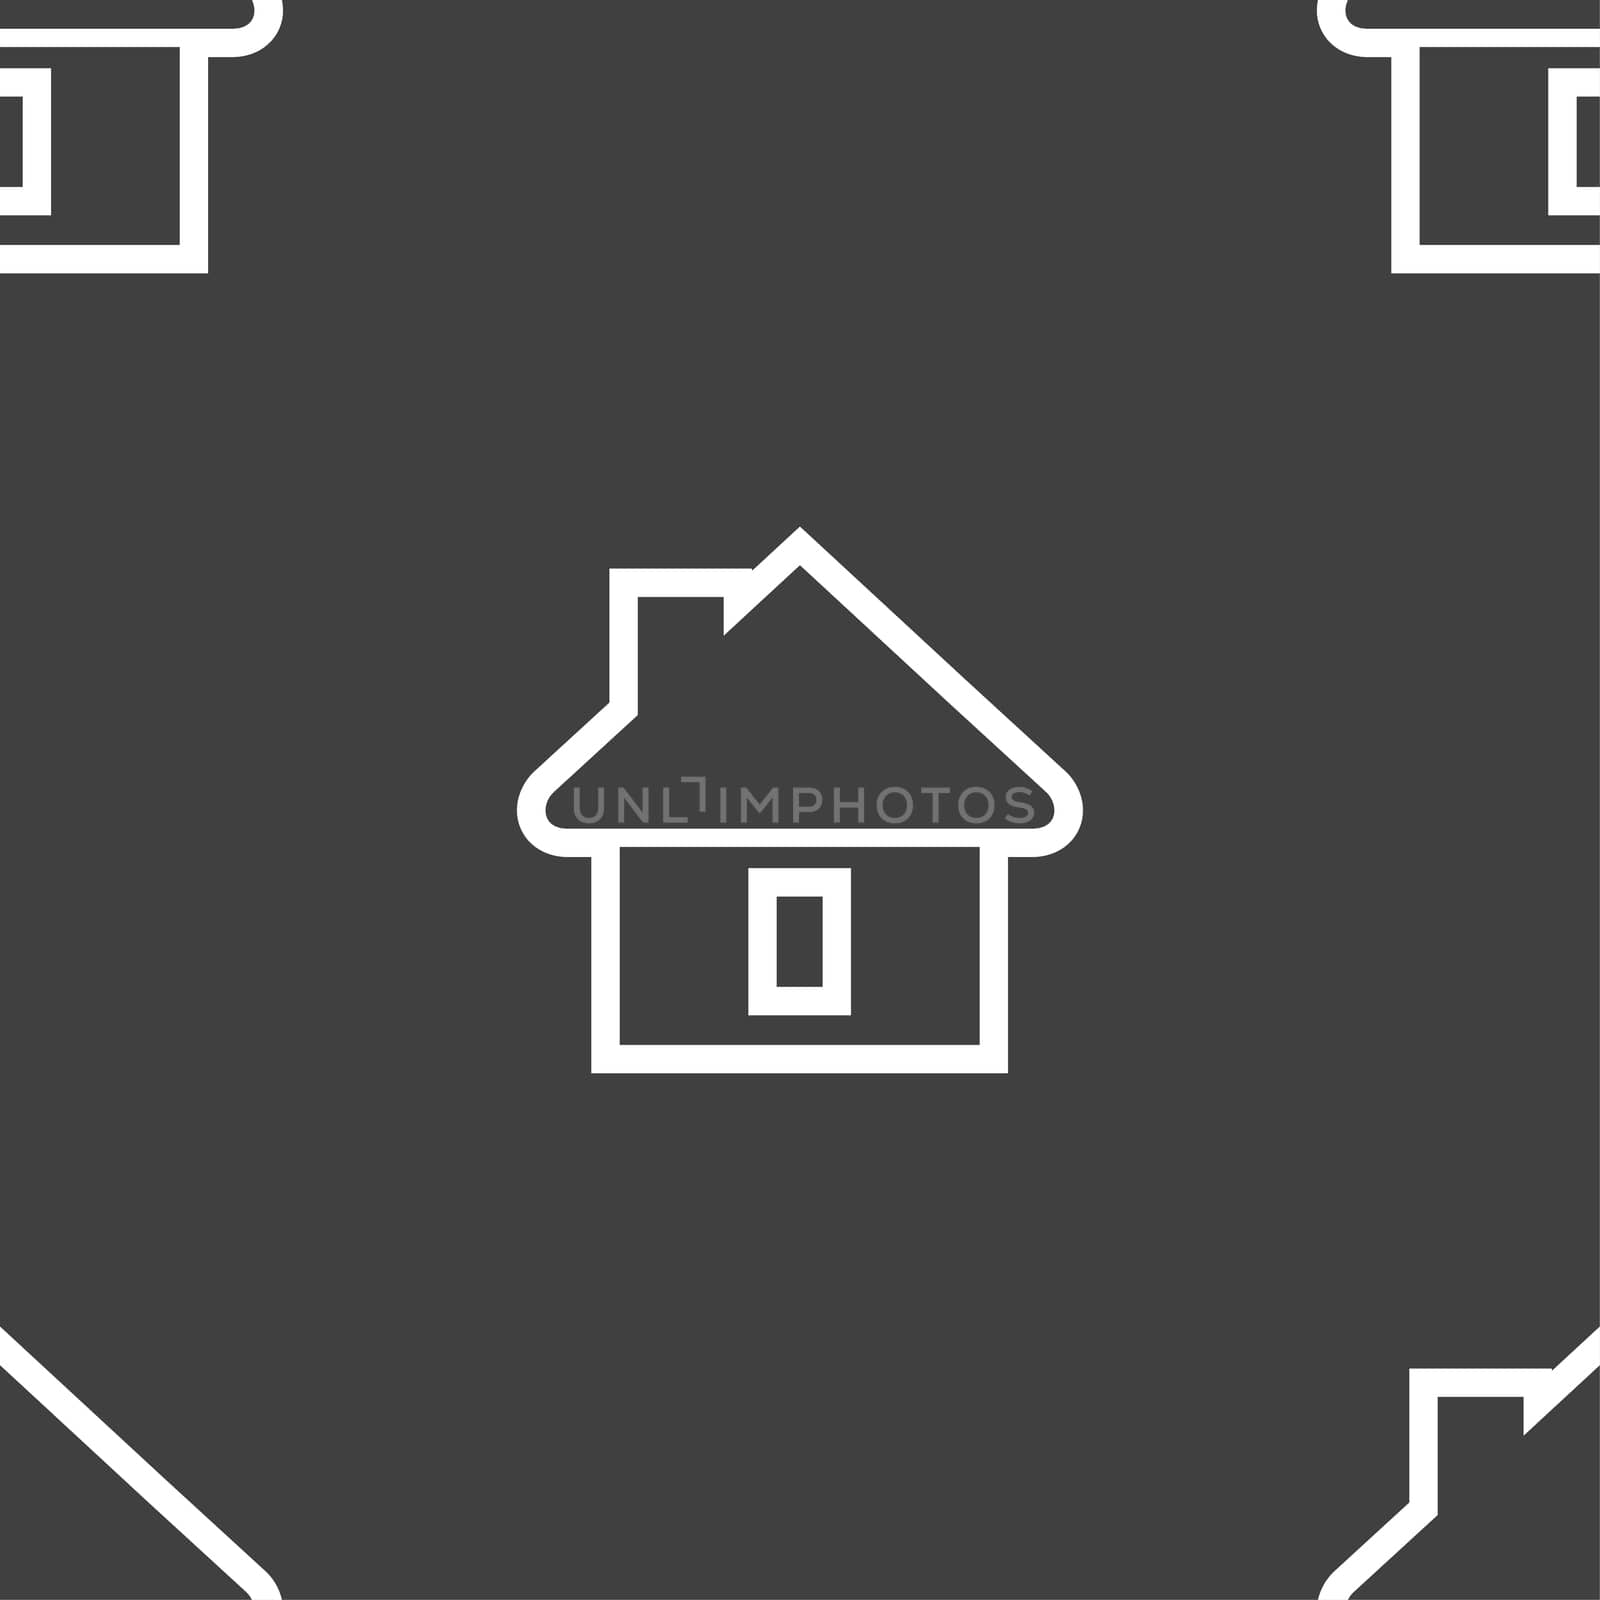 House icon sign. Seamless pattern on a gray background. illustration